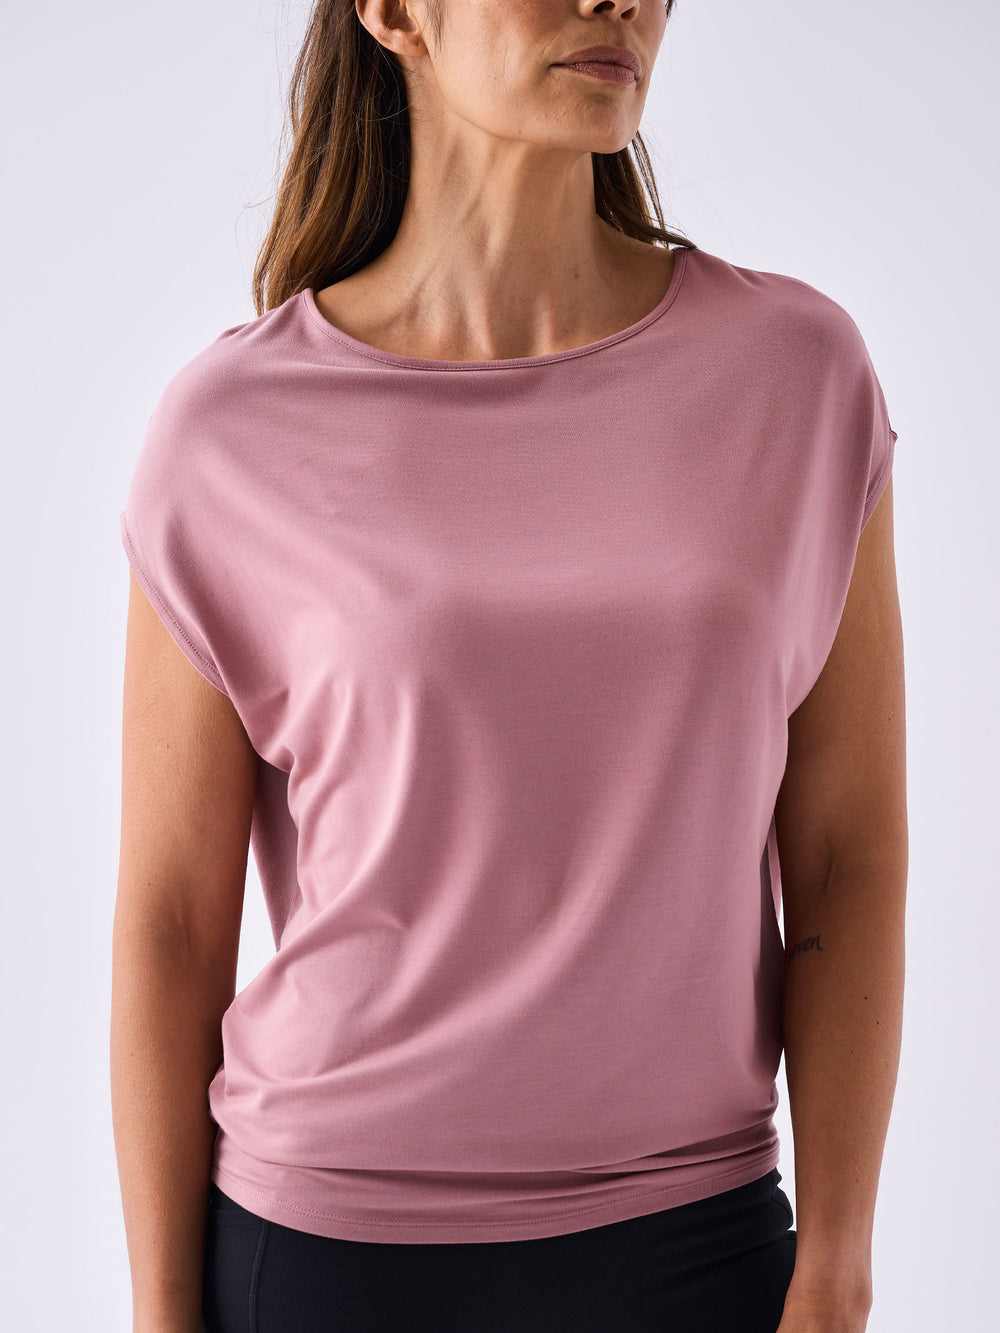 Modal Luxe Layer Tee - Rosewater